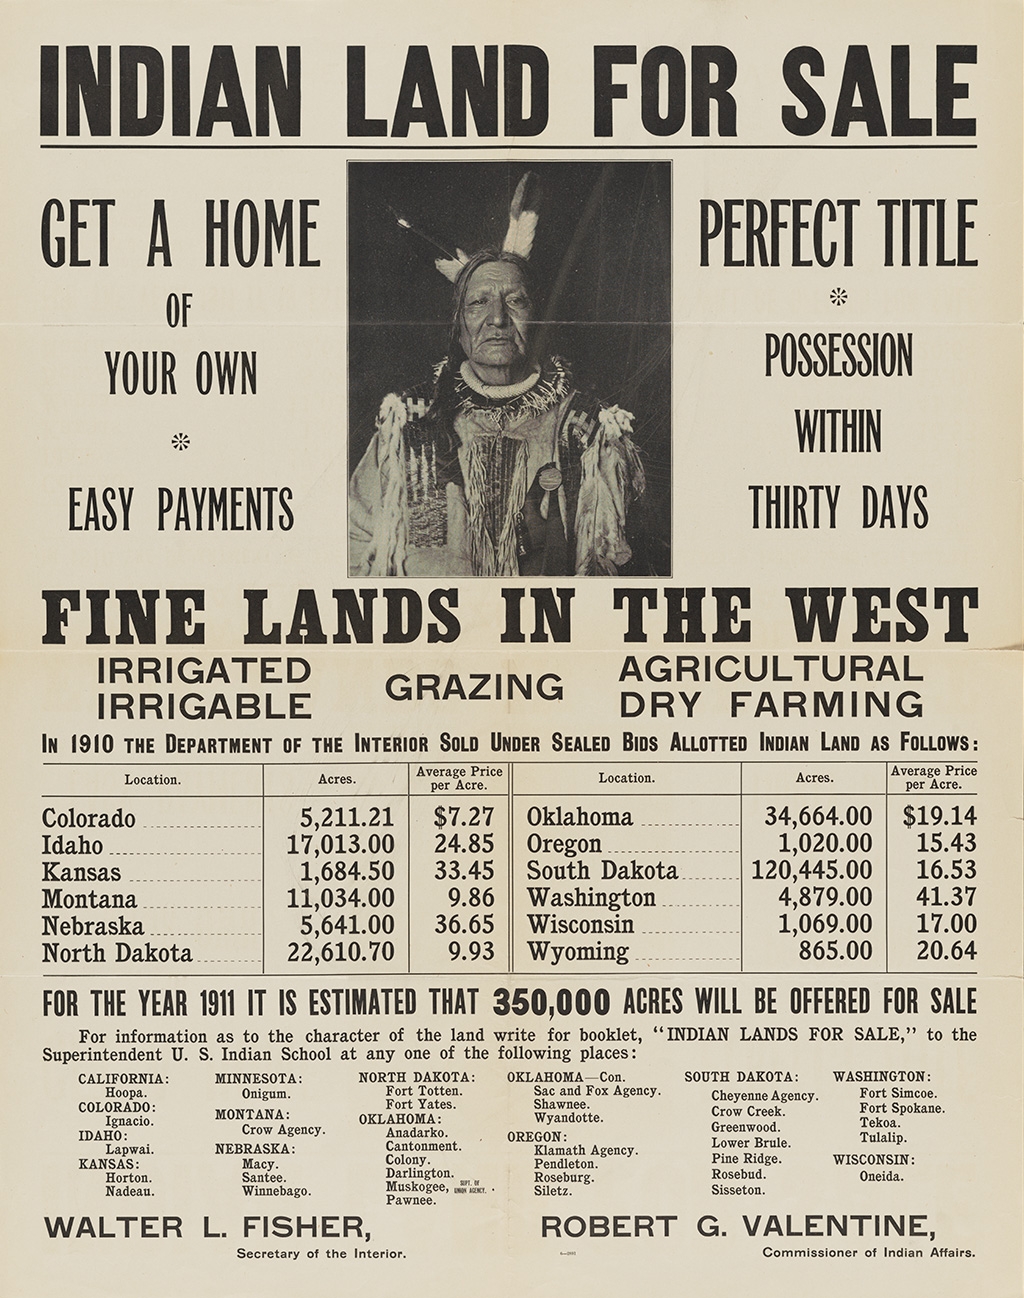 Print advertising land for sale by the United States Department of the Interior in 1911.